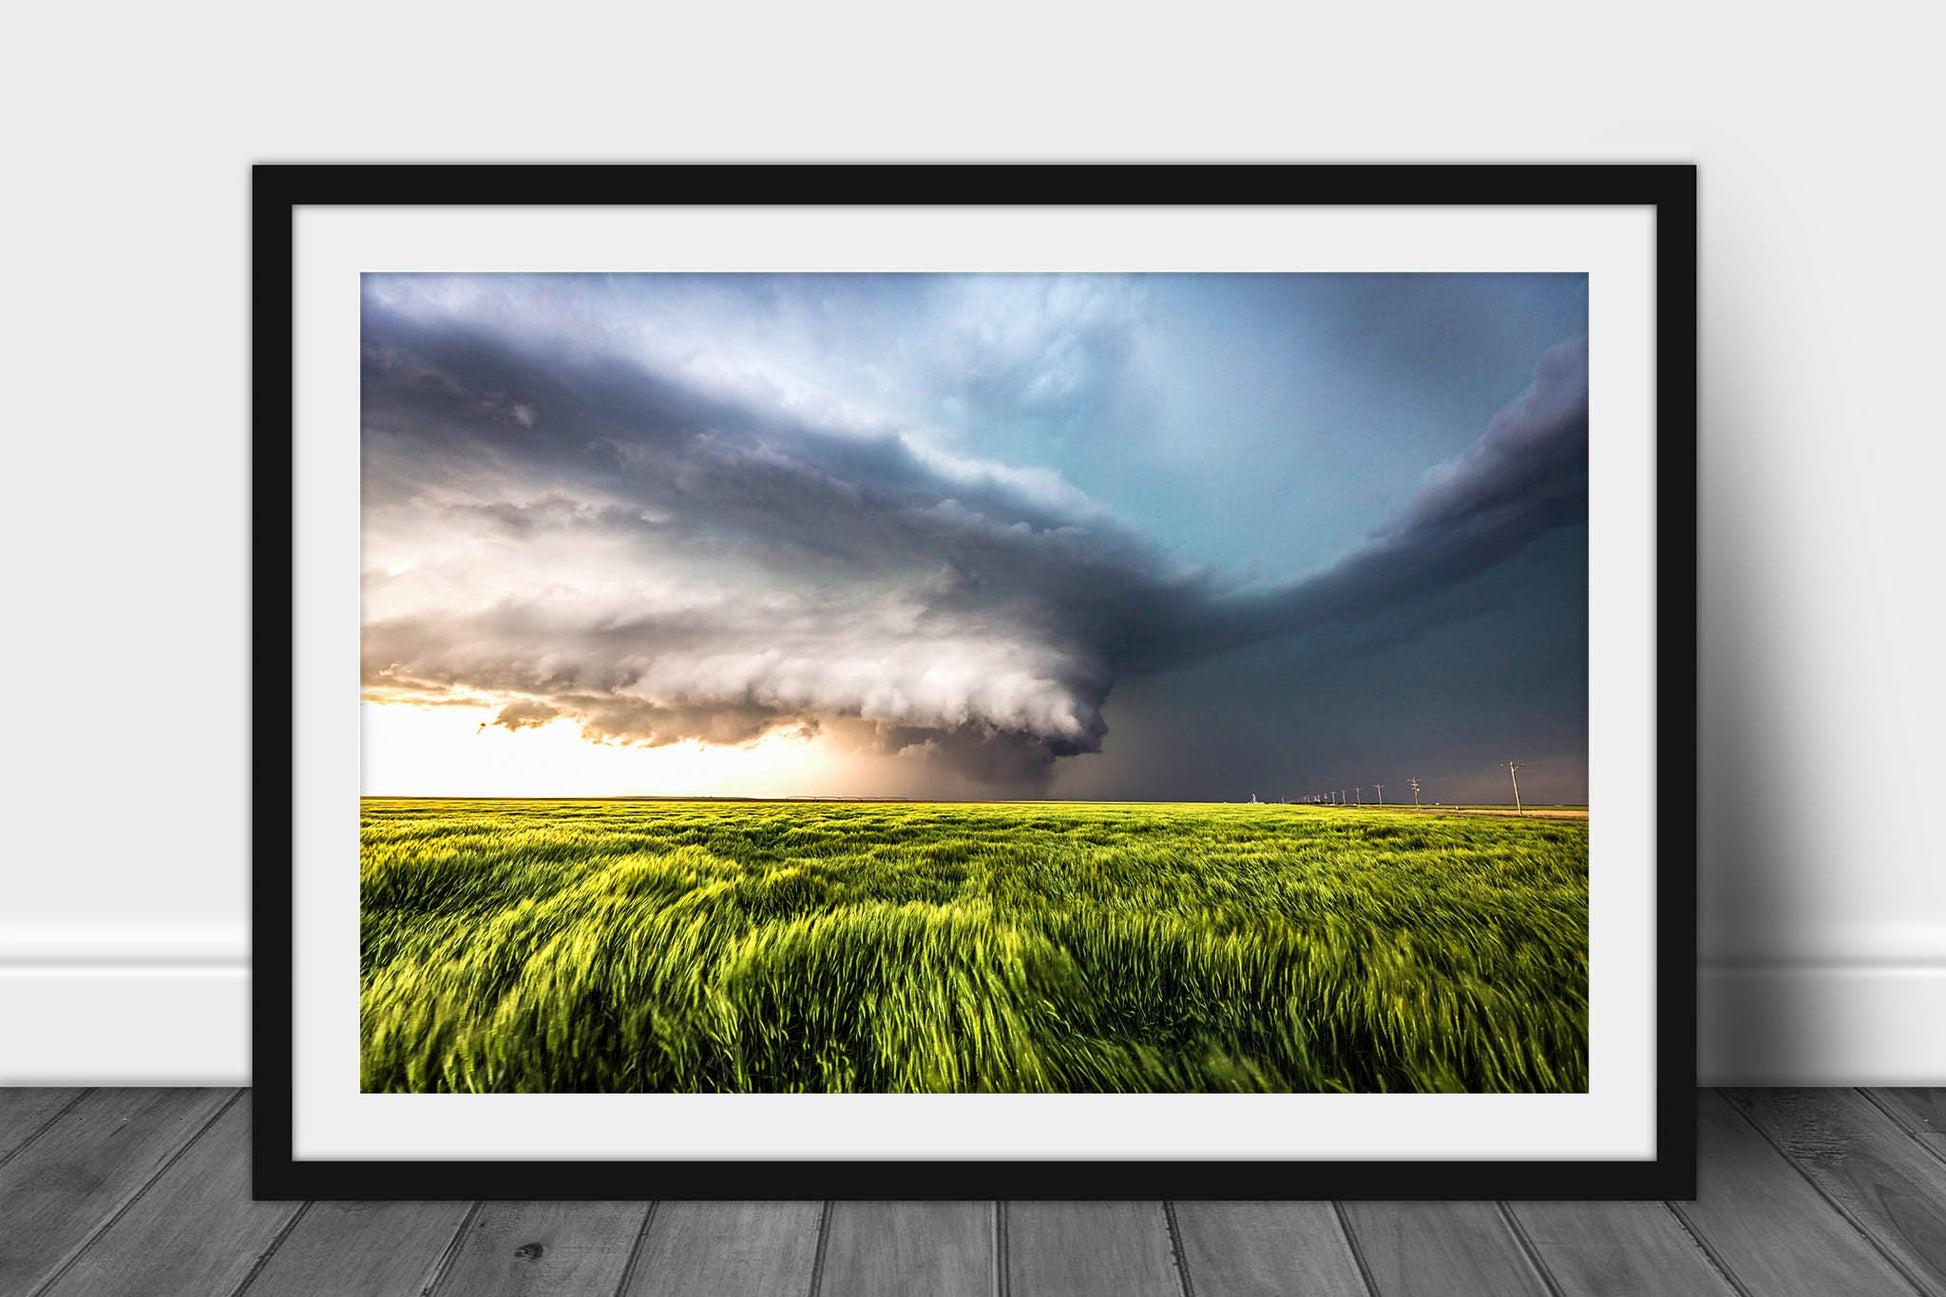 Framed storm photography print of a supercell thunderstorm over a waving wheat field on a stormy spring day on the plains of Kansas by Sean Ramsey of Southern Plains Photography.